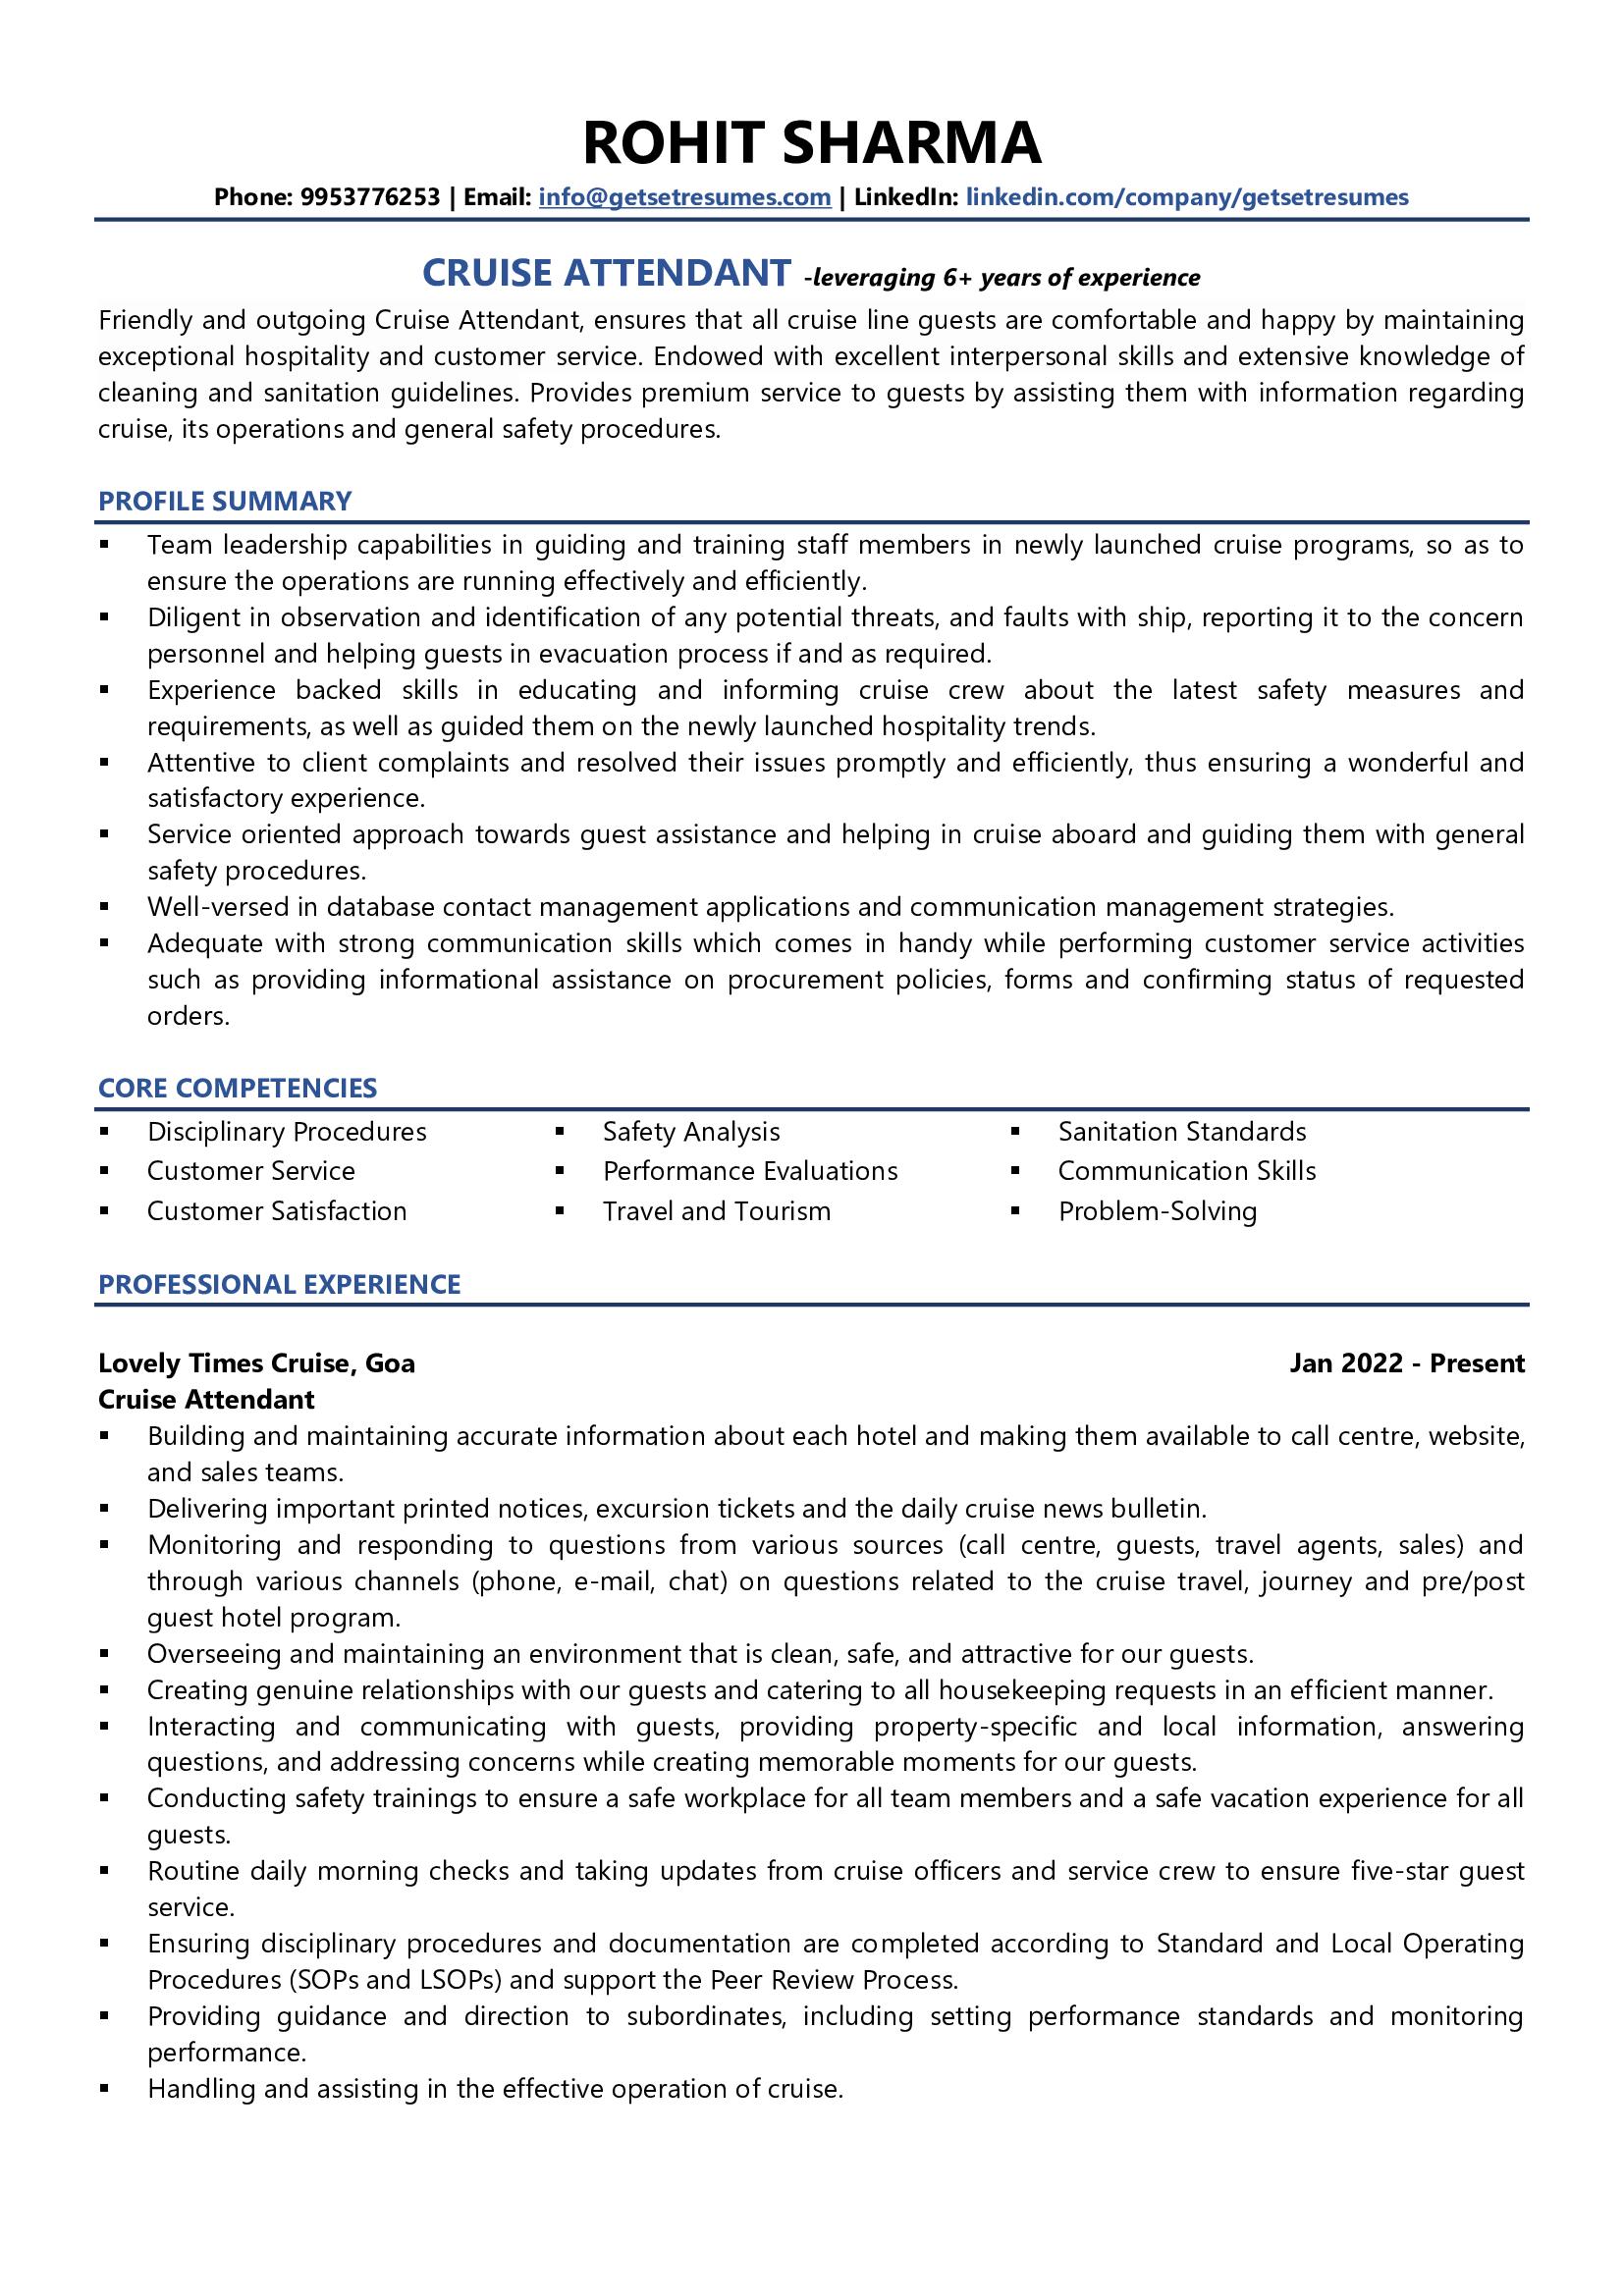 Cruise Ship Attendant - Resume Example & Template